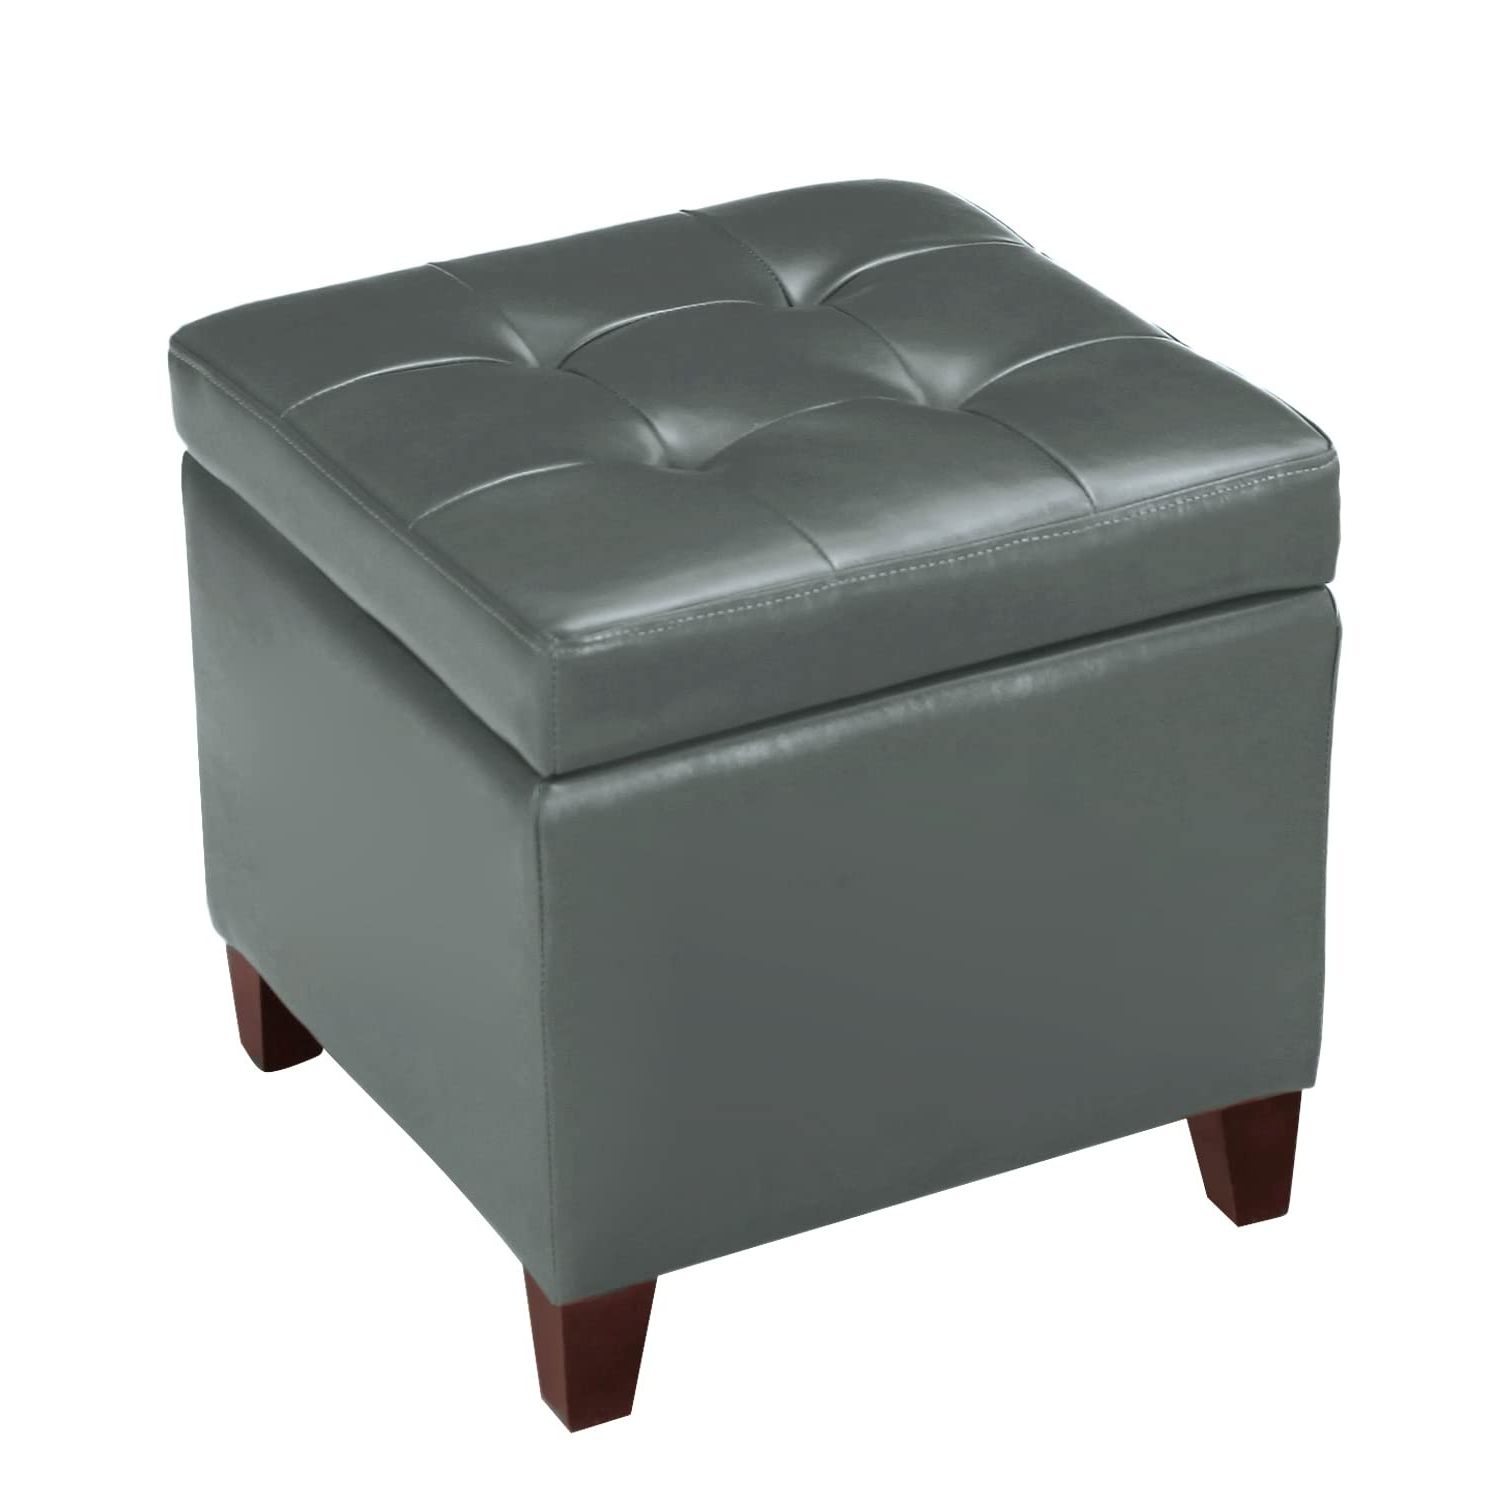 18 Inch Ottomans Inside Current Amazon: Adeco Bonded Leather Square Tufted Cubic Cube Storage  Footstool, 18" Inch Ottomans & Storage Ottomans, With Lid, Dim Gray : Home  & Kitchen (View 1 of 10)